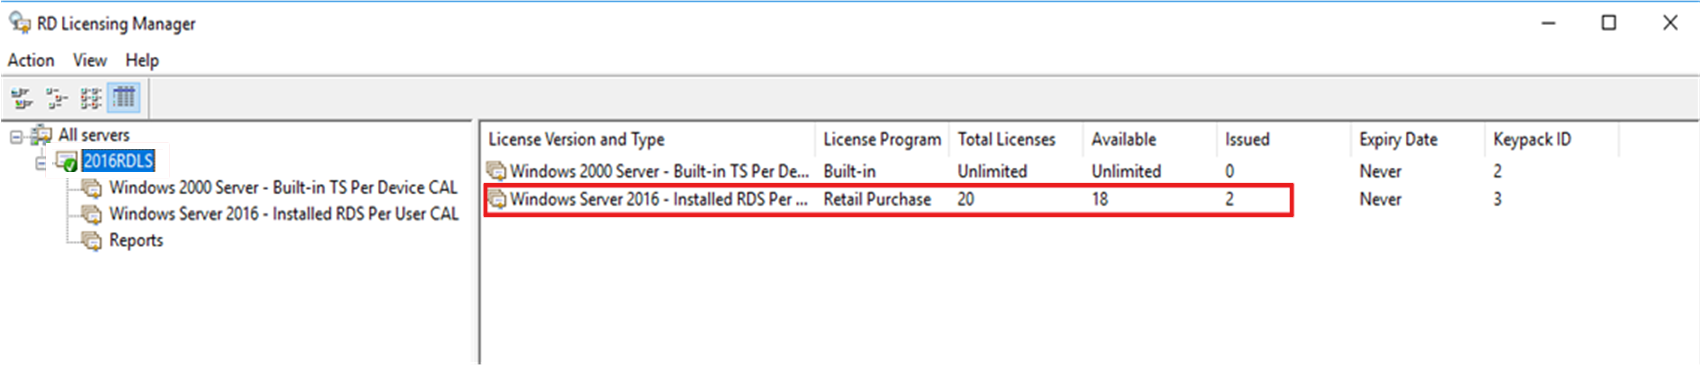 Cannot connect to RDS because no RD Licensing servers are available - Windows  Server | Microsoft Learn